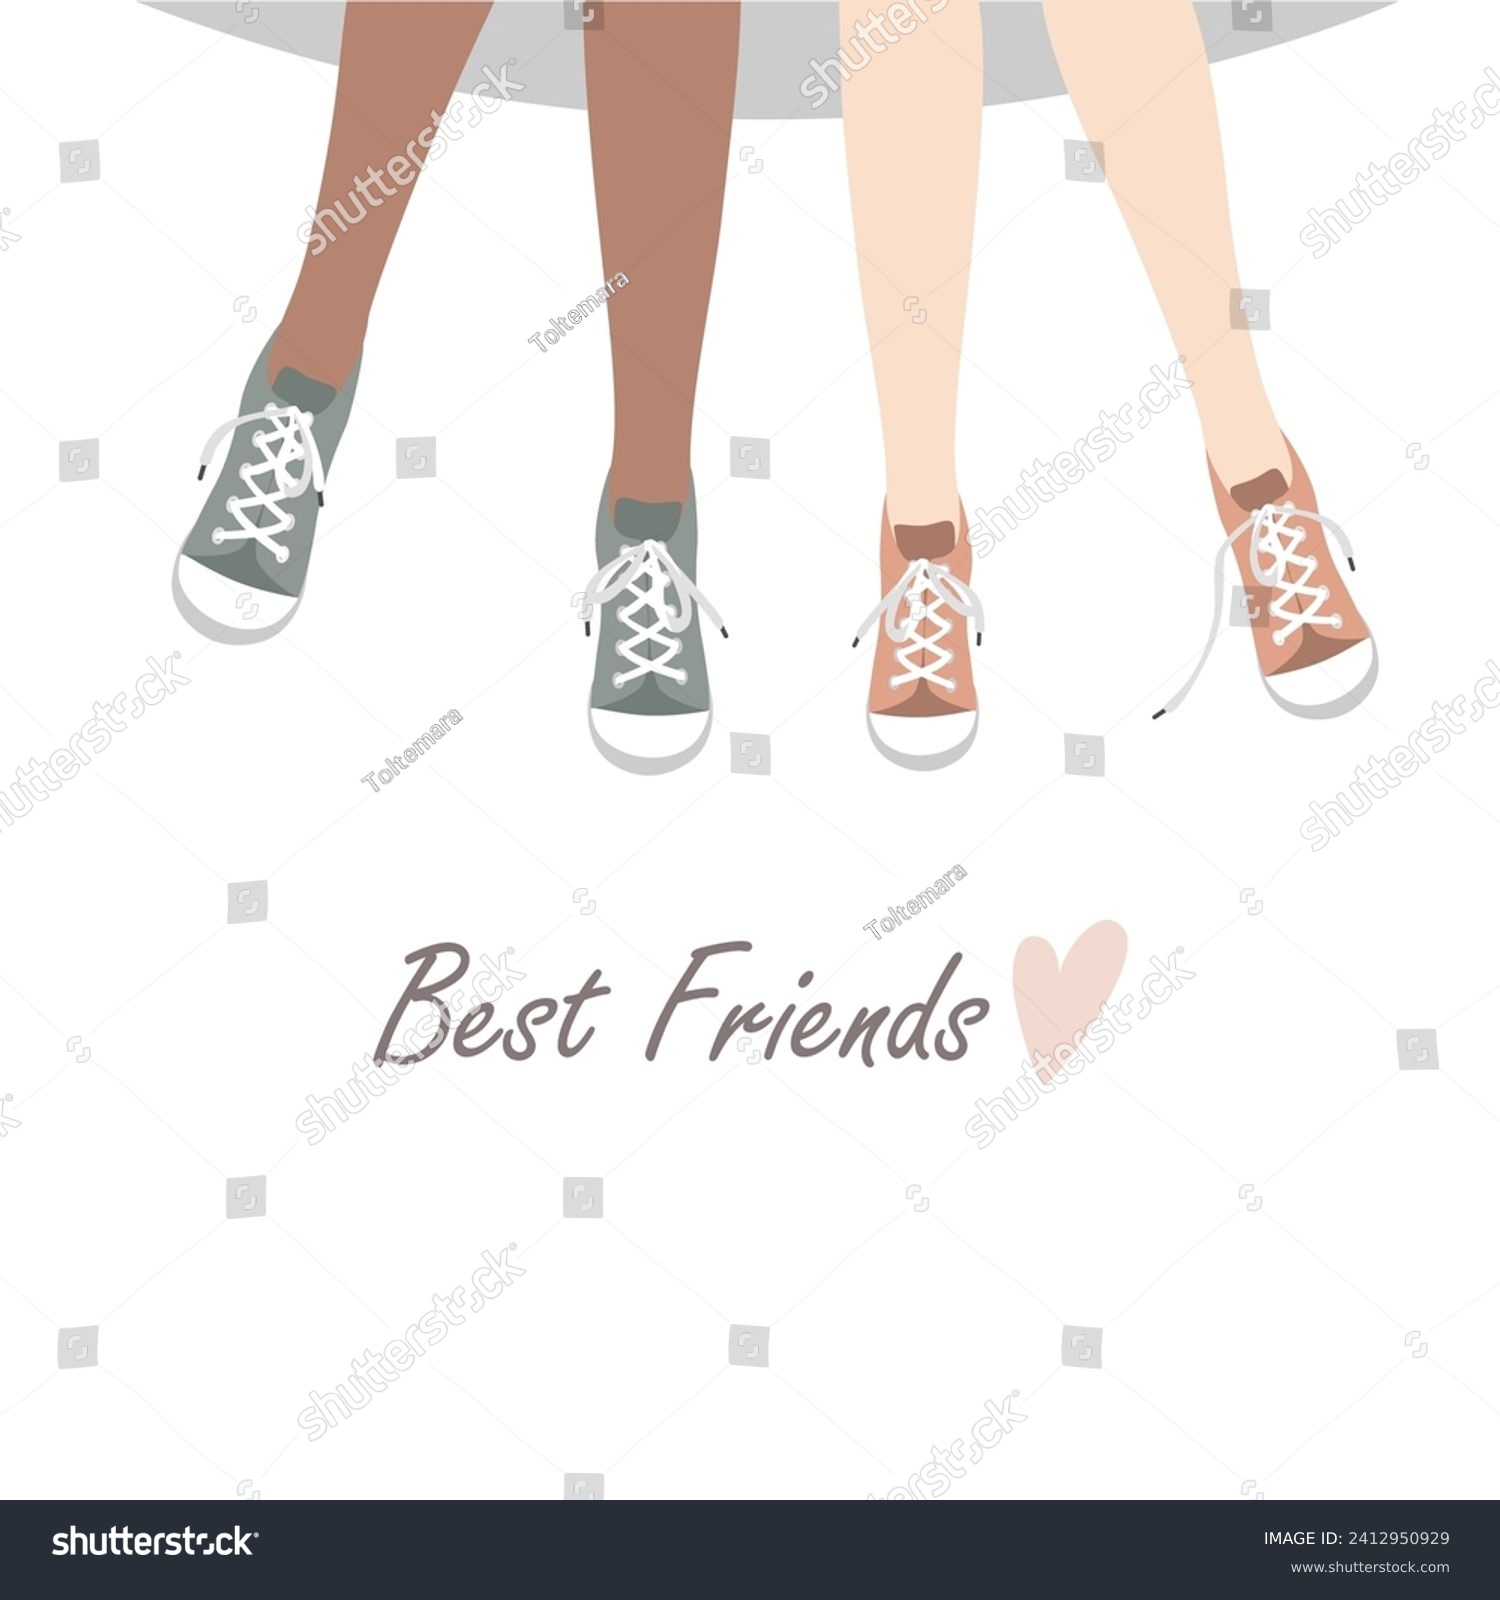 SVG of Girl friends legs in sneakers shoes. Vector illustration isolated on white background. svg